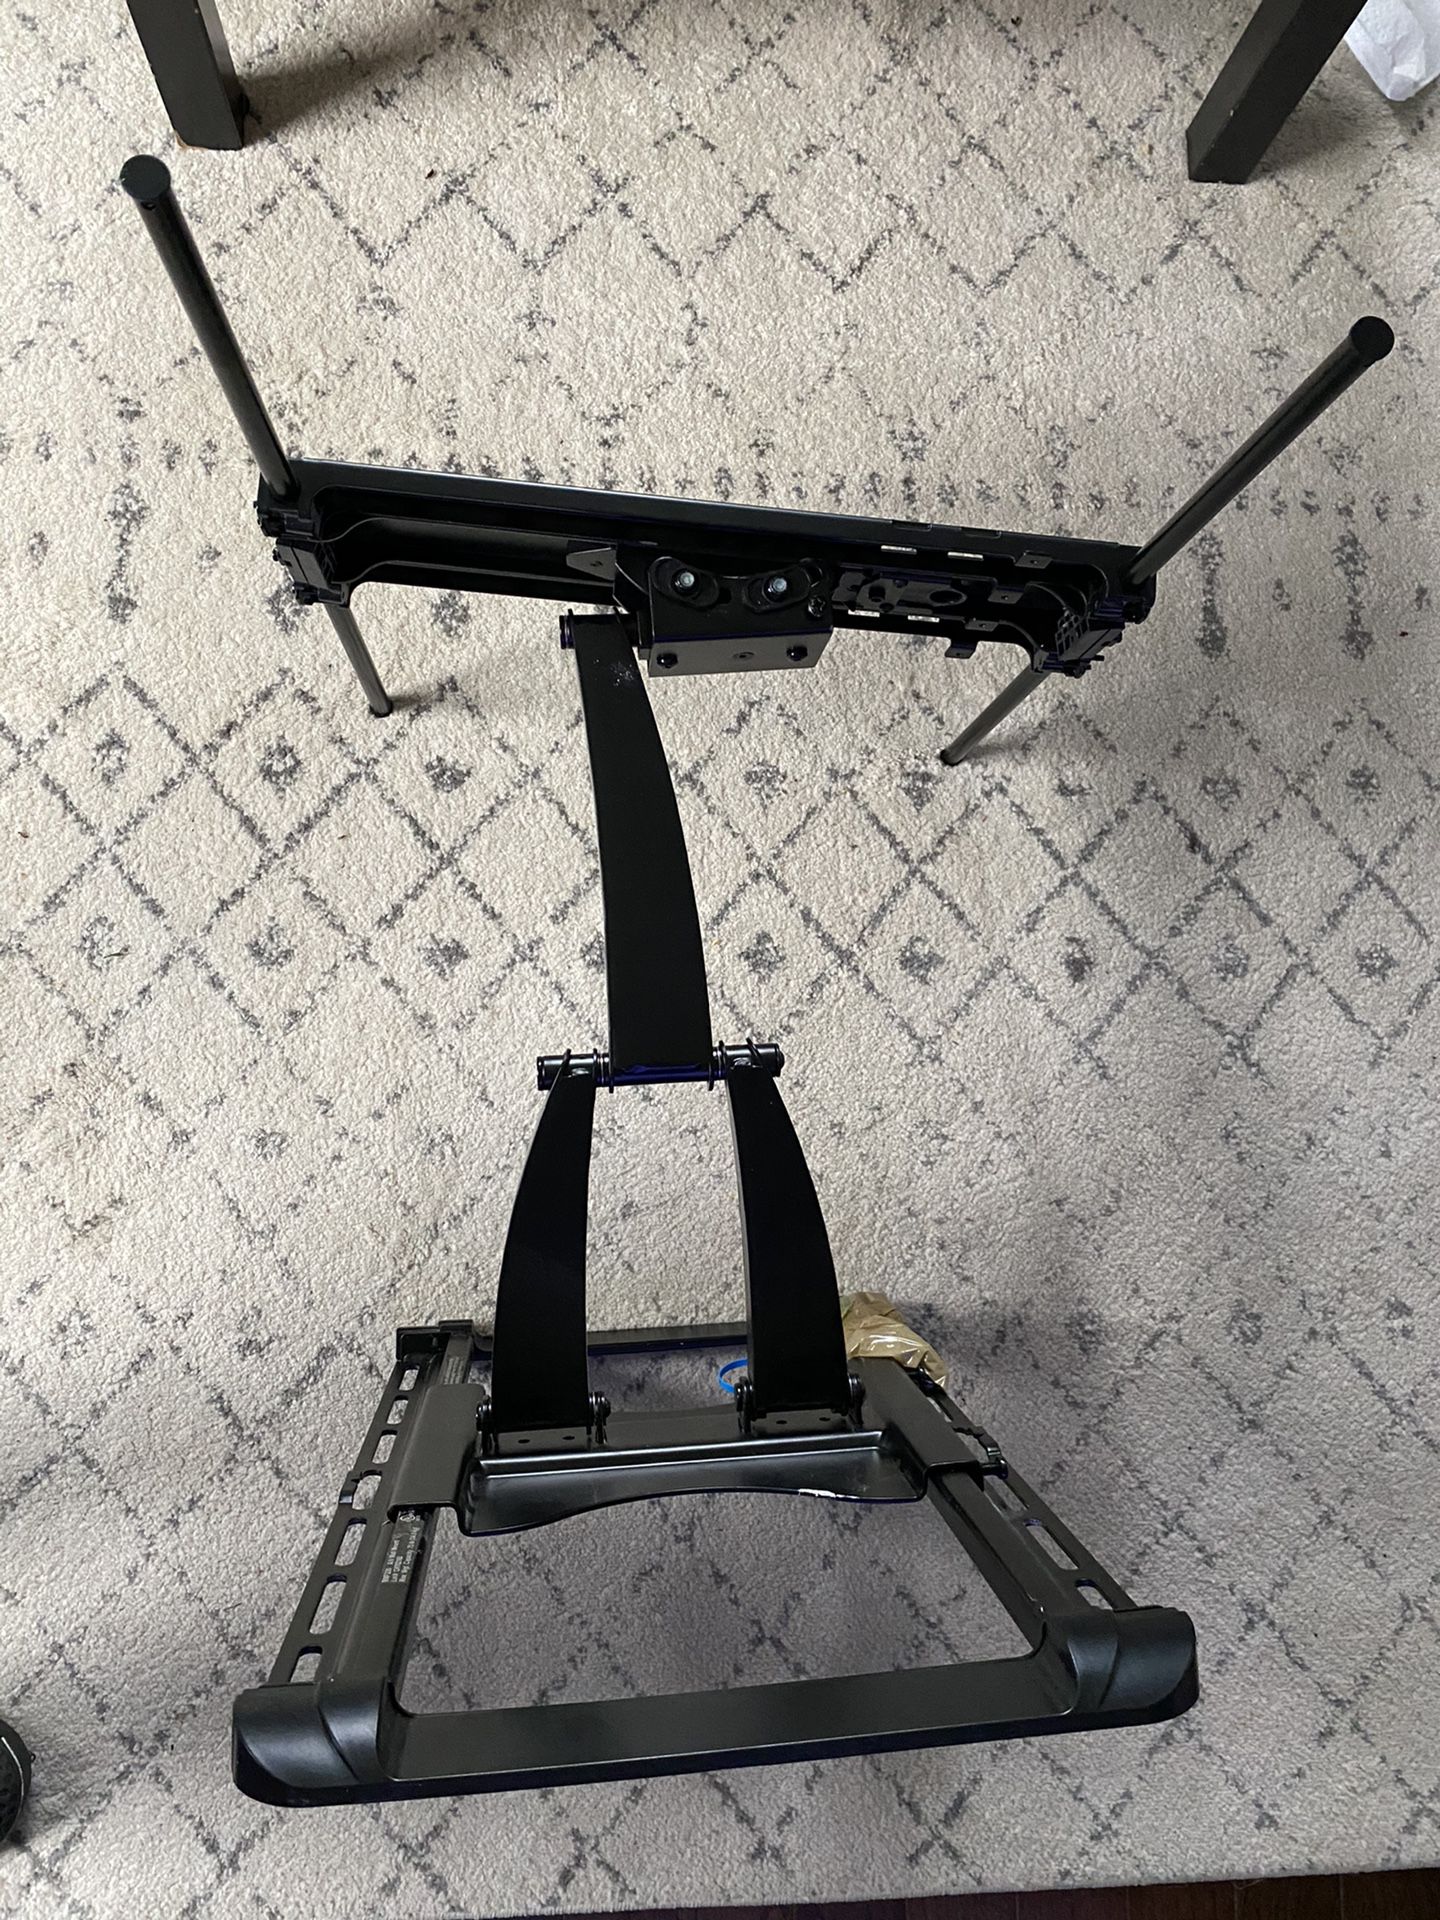 Tv mount bracket for big tv up to 70” inches tv for only 60$